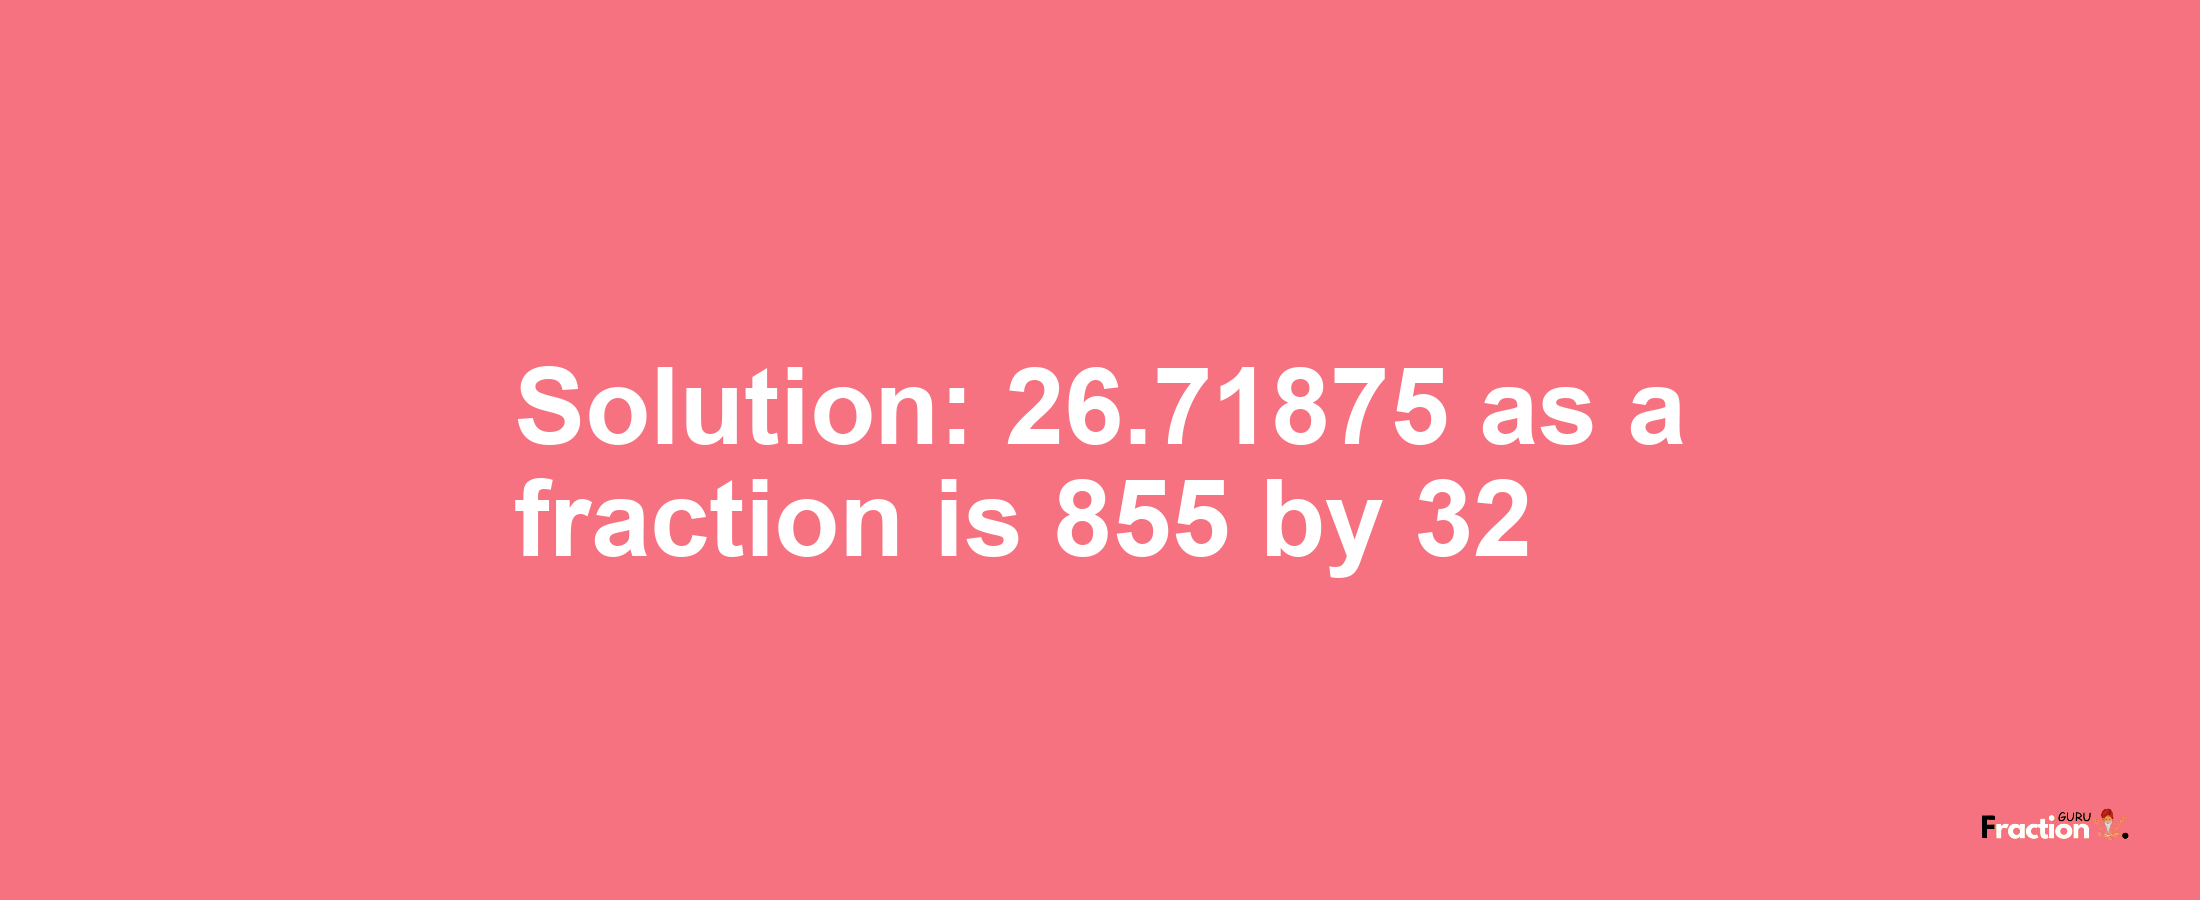 Solution:26.71875 as a fraction is 855/32